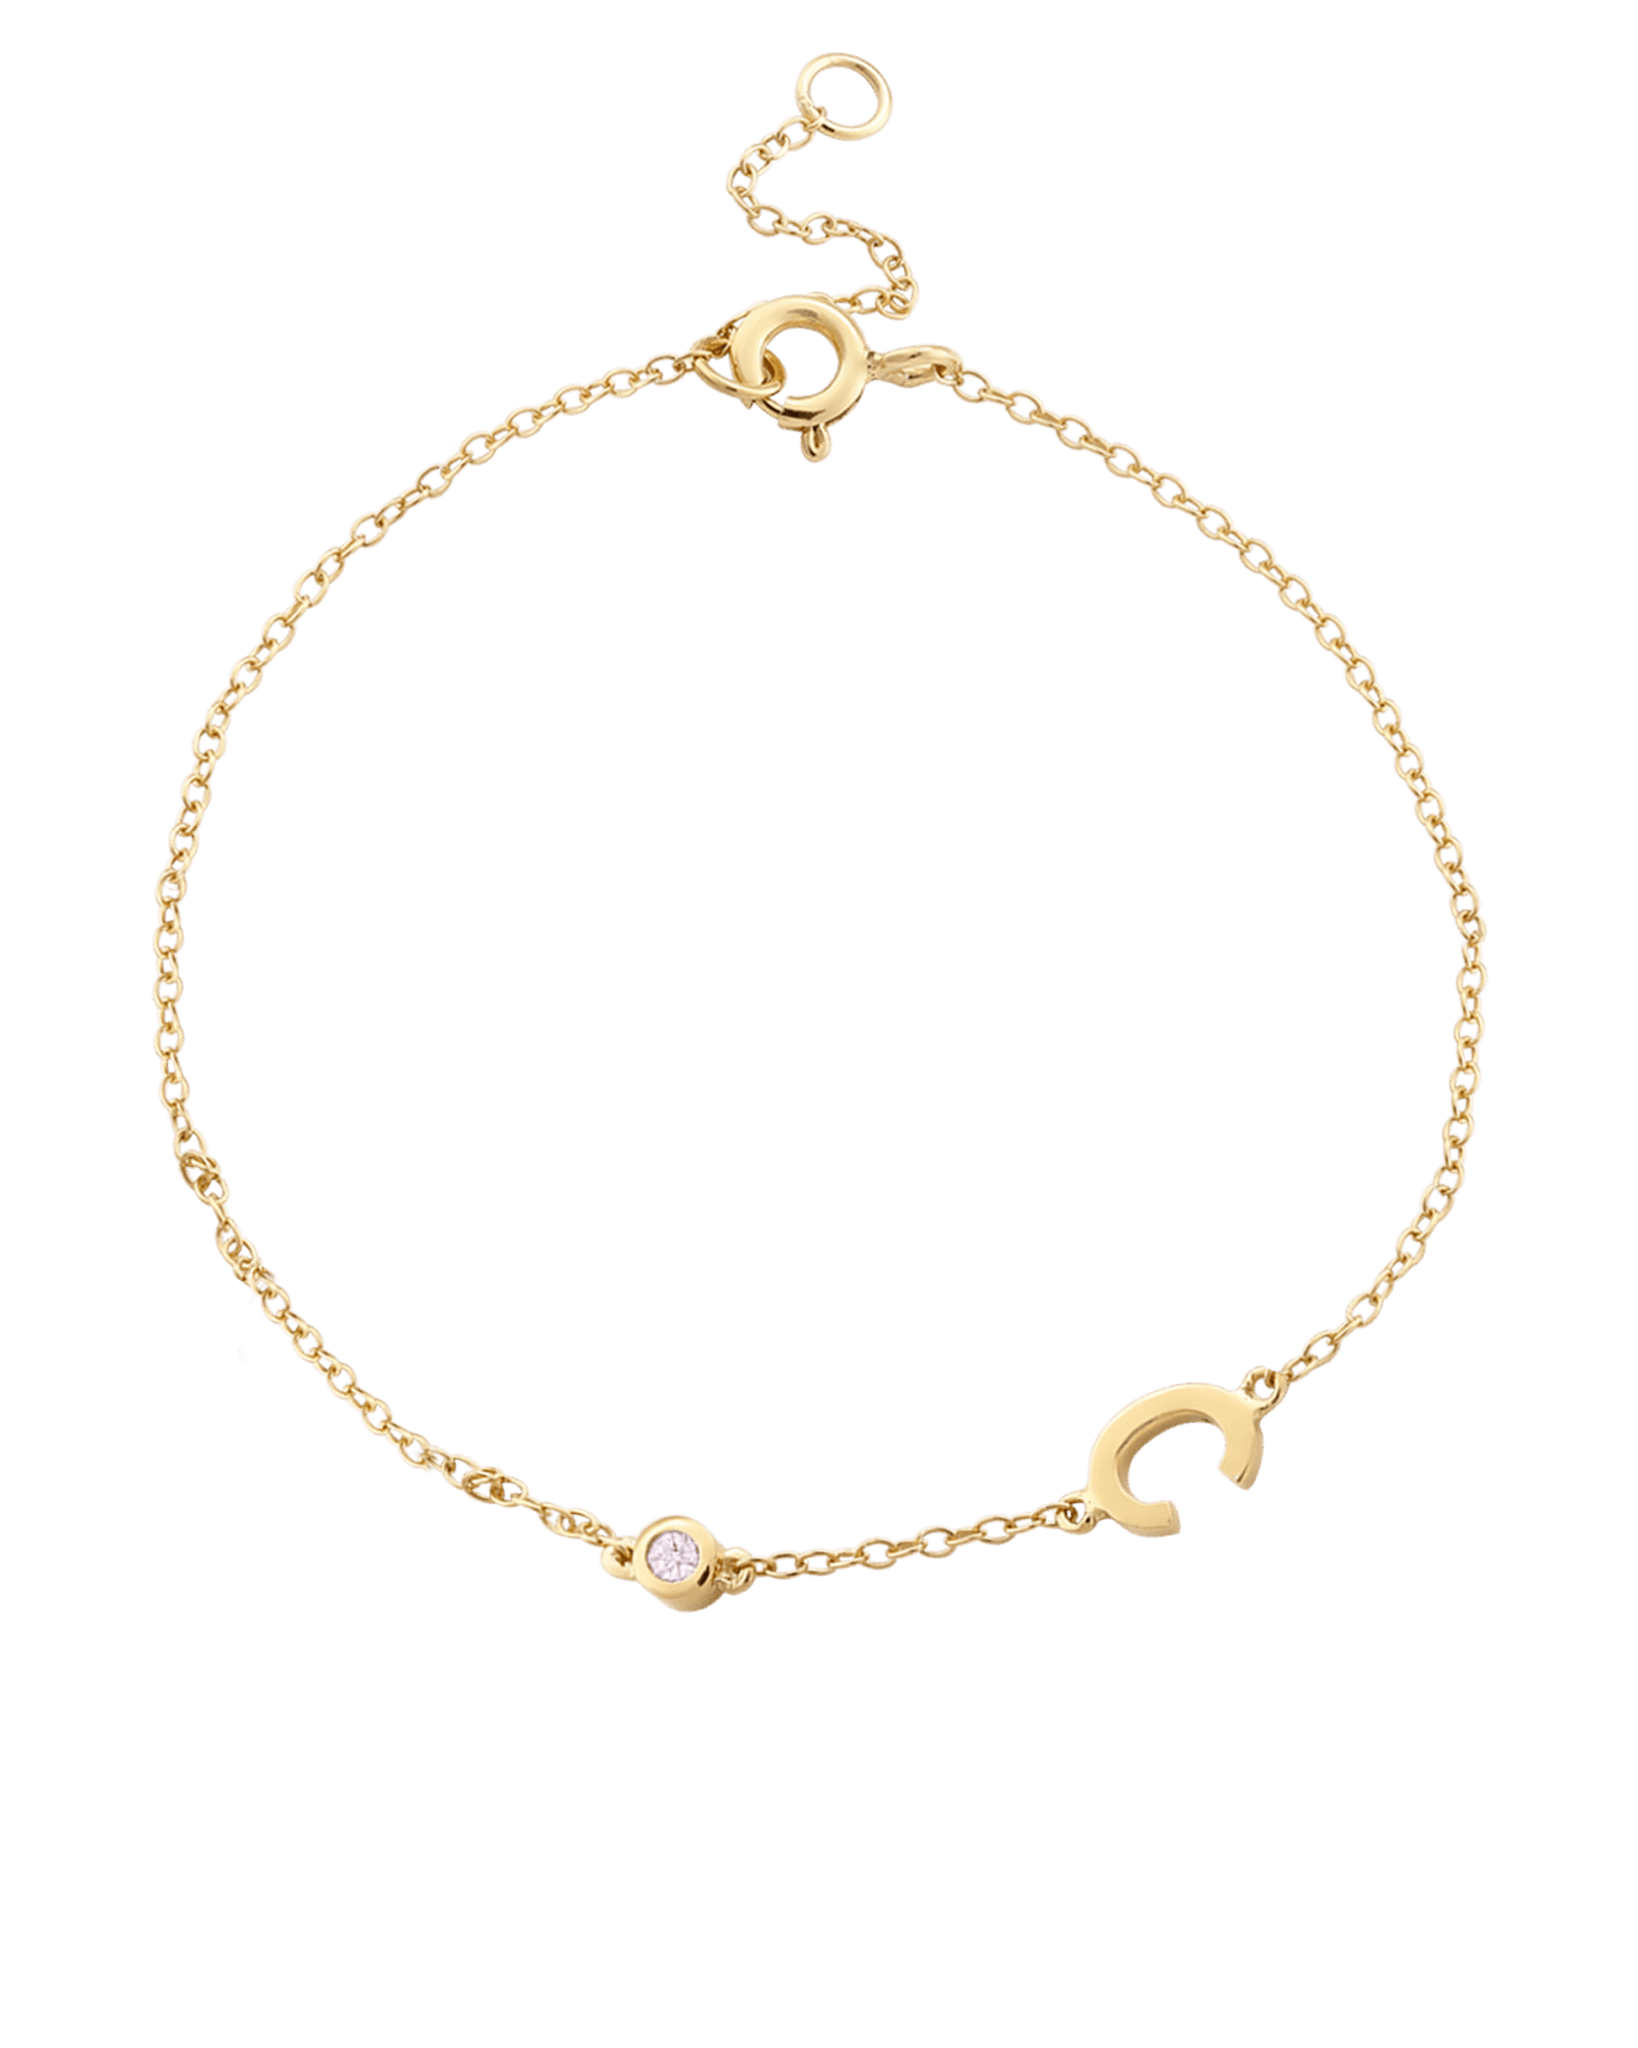 The Initial Bracelet with Diamonds - 14K Yellow Gold